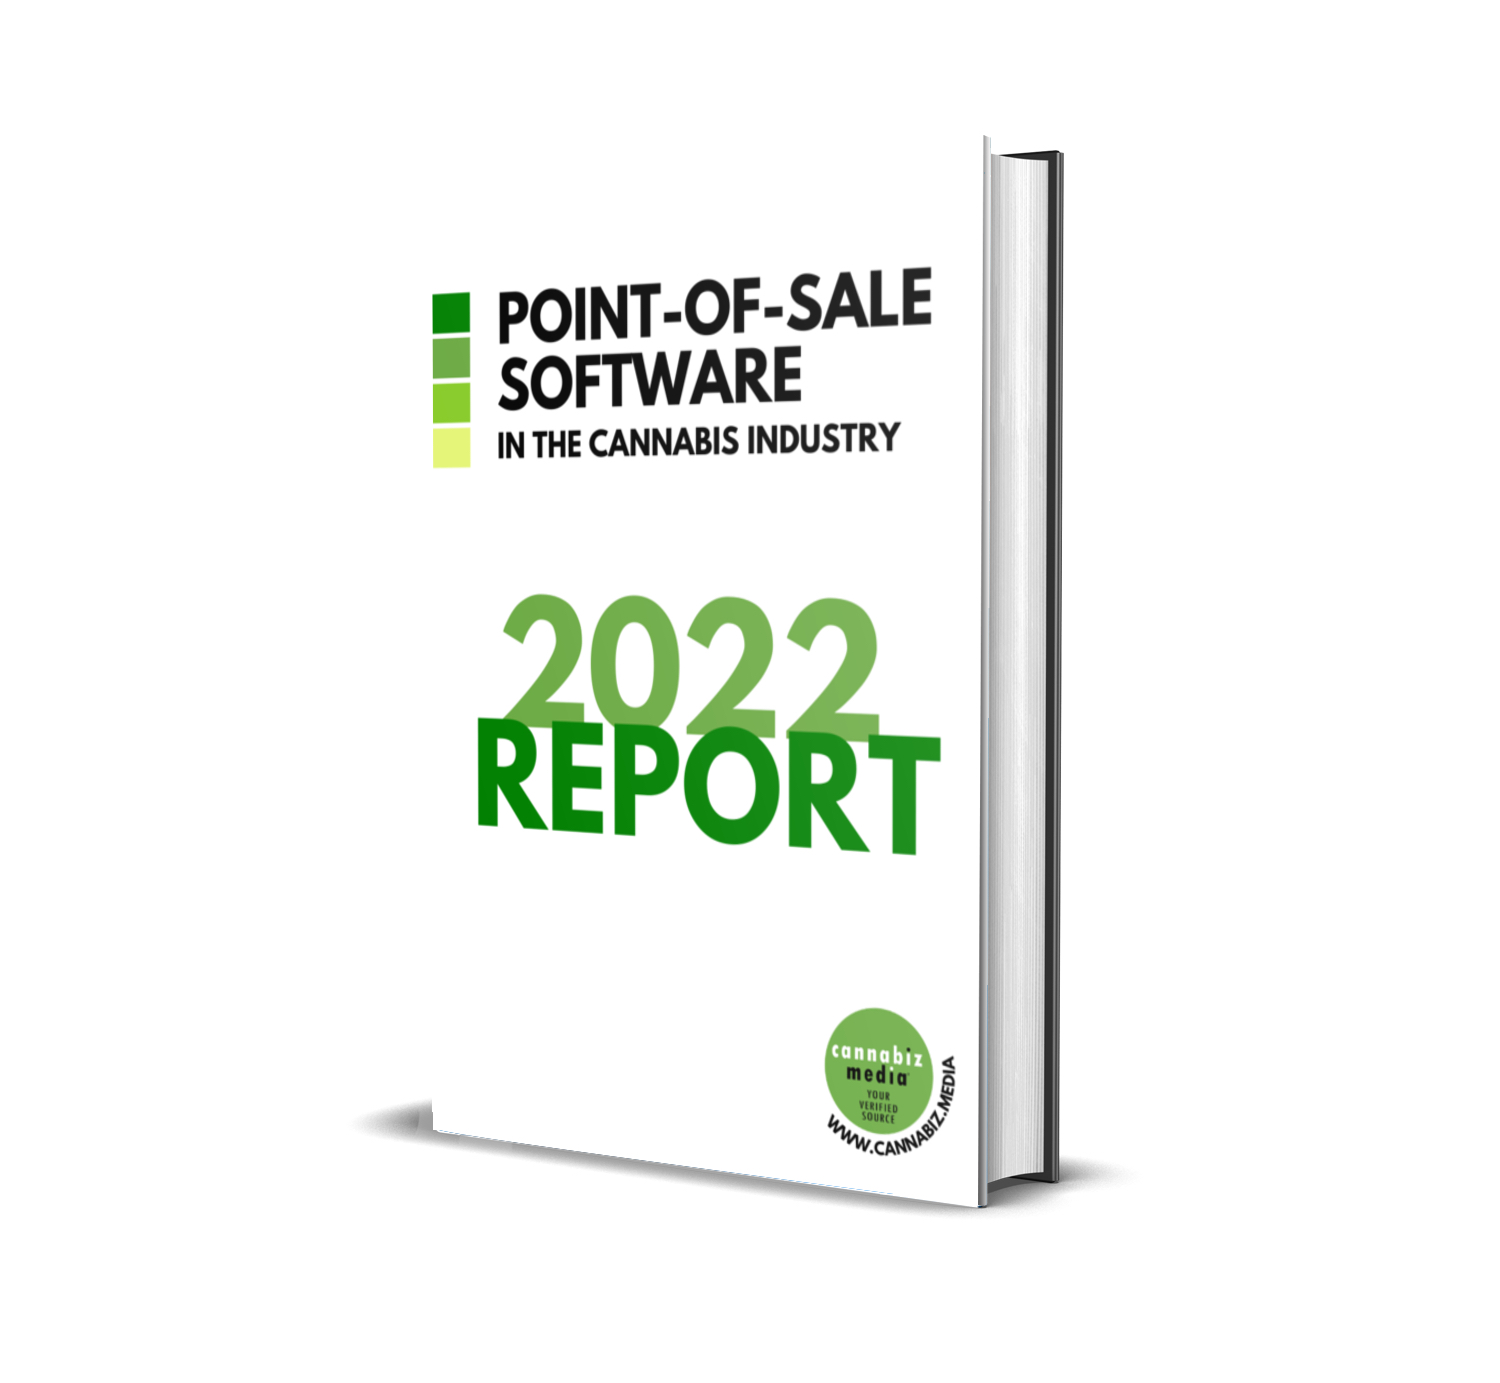 Point-of-Sale Software in the Cannabis Industry - 2022 Report